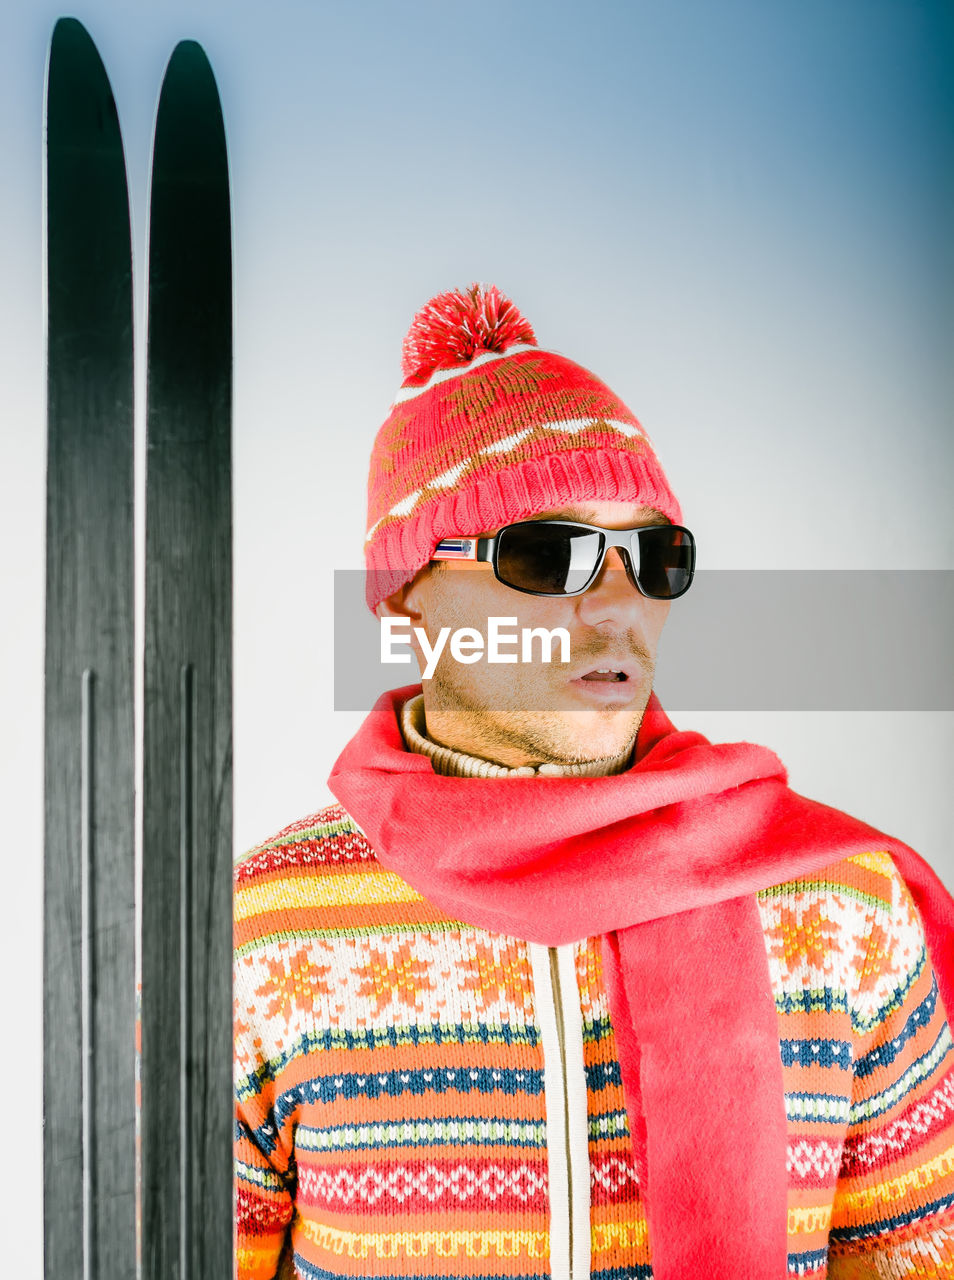 Man in a knitted sweater, woolen cap, scarf and sunglasses stands with skis against blue background.